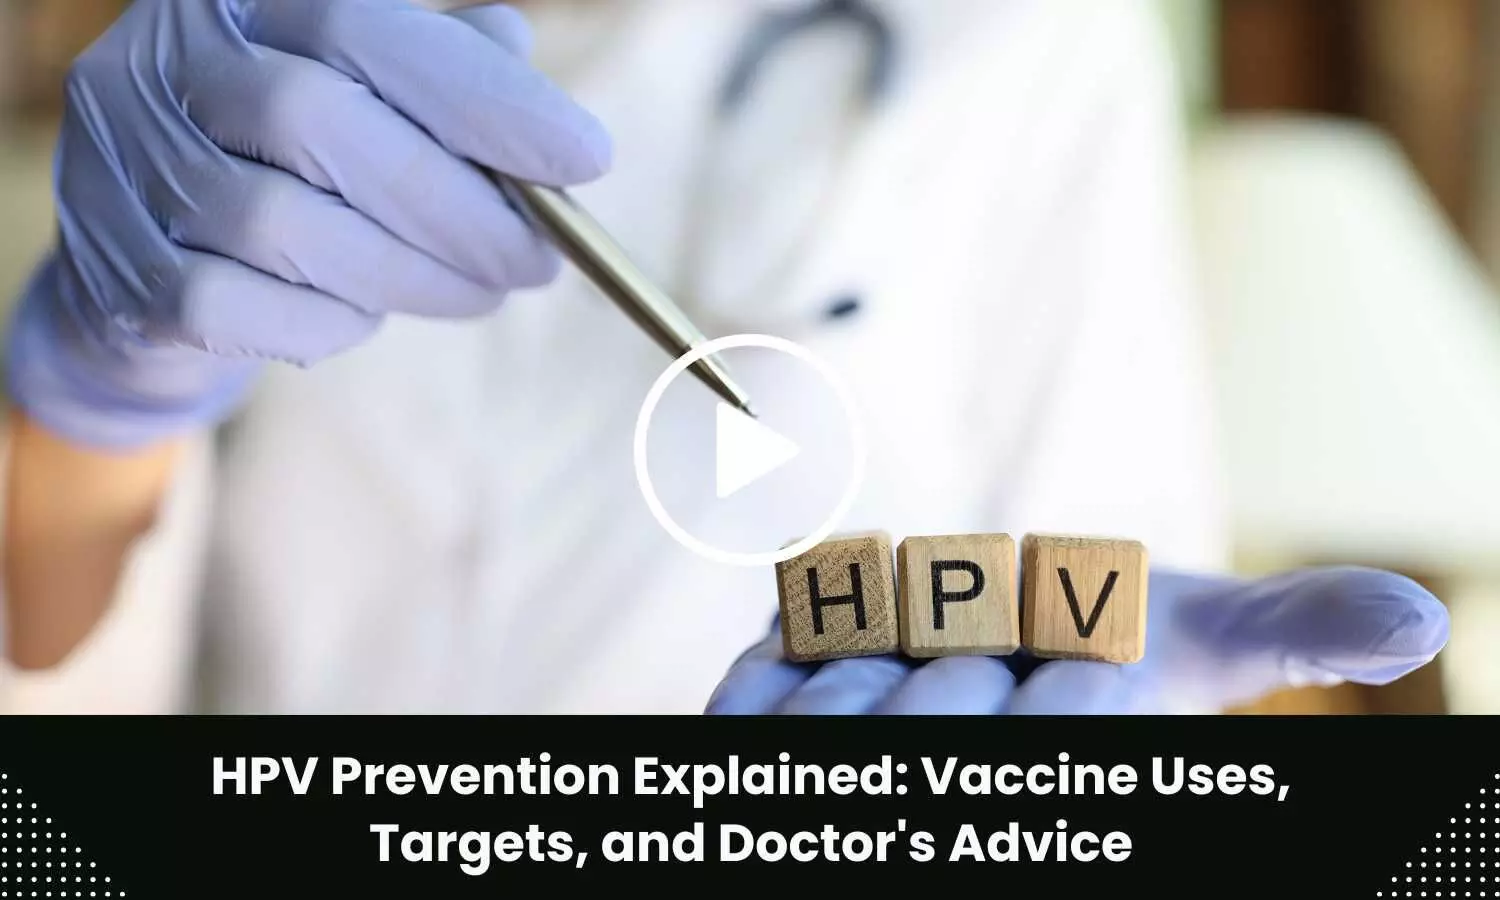 HPV Prevention Explained: Vaccine Uses, Targets, and Doctors Advice